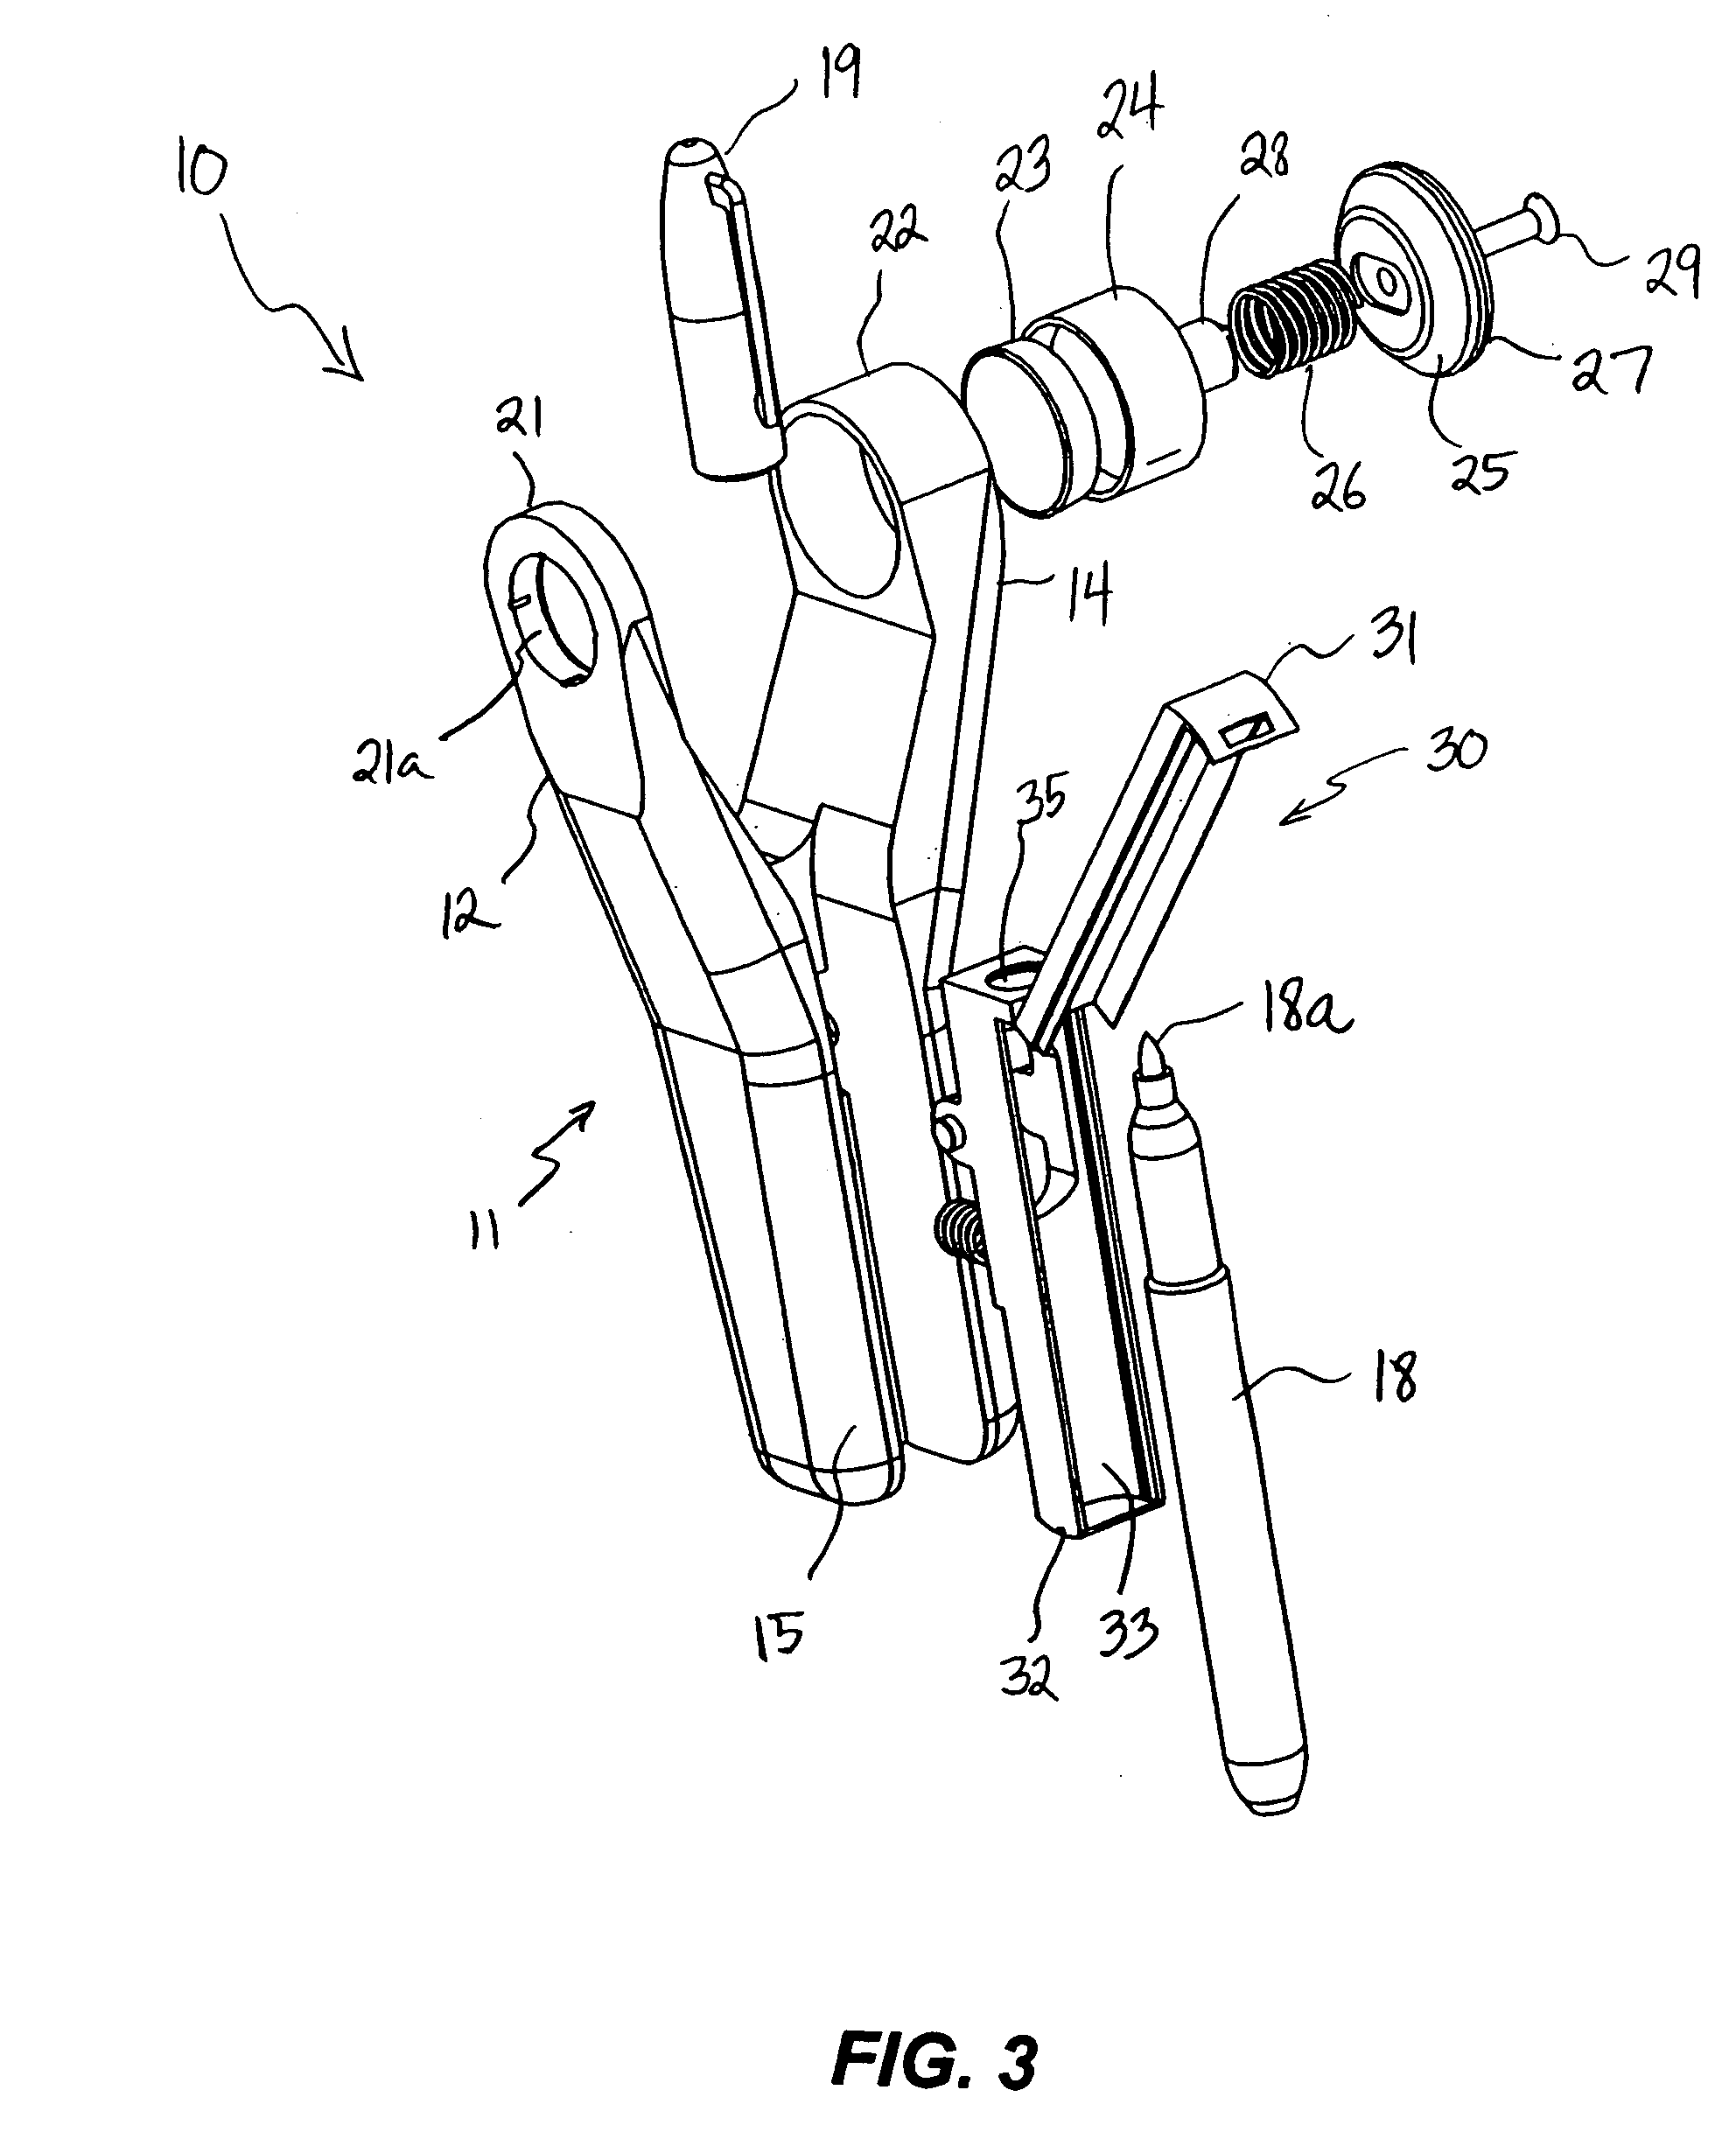 Hand-held device for marking a golf ball